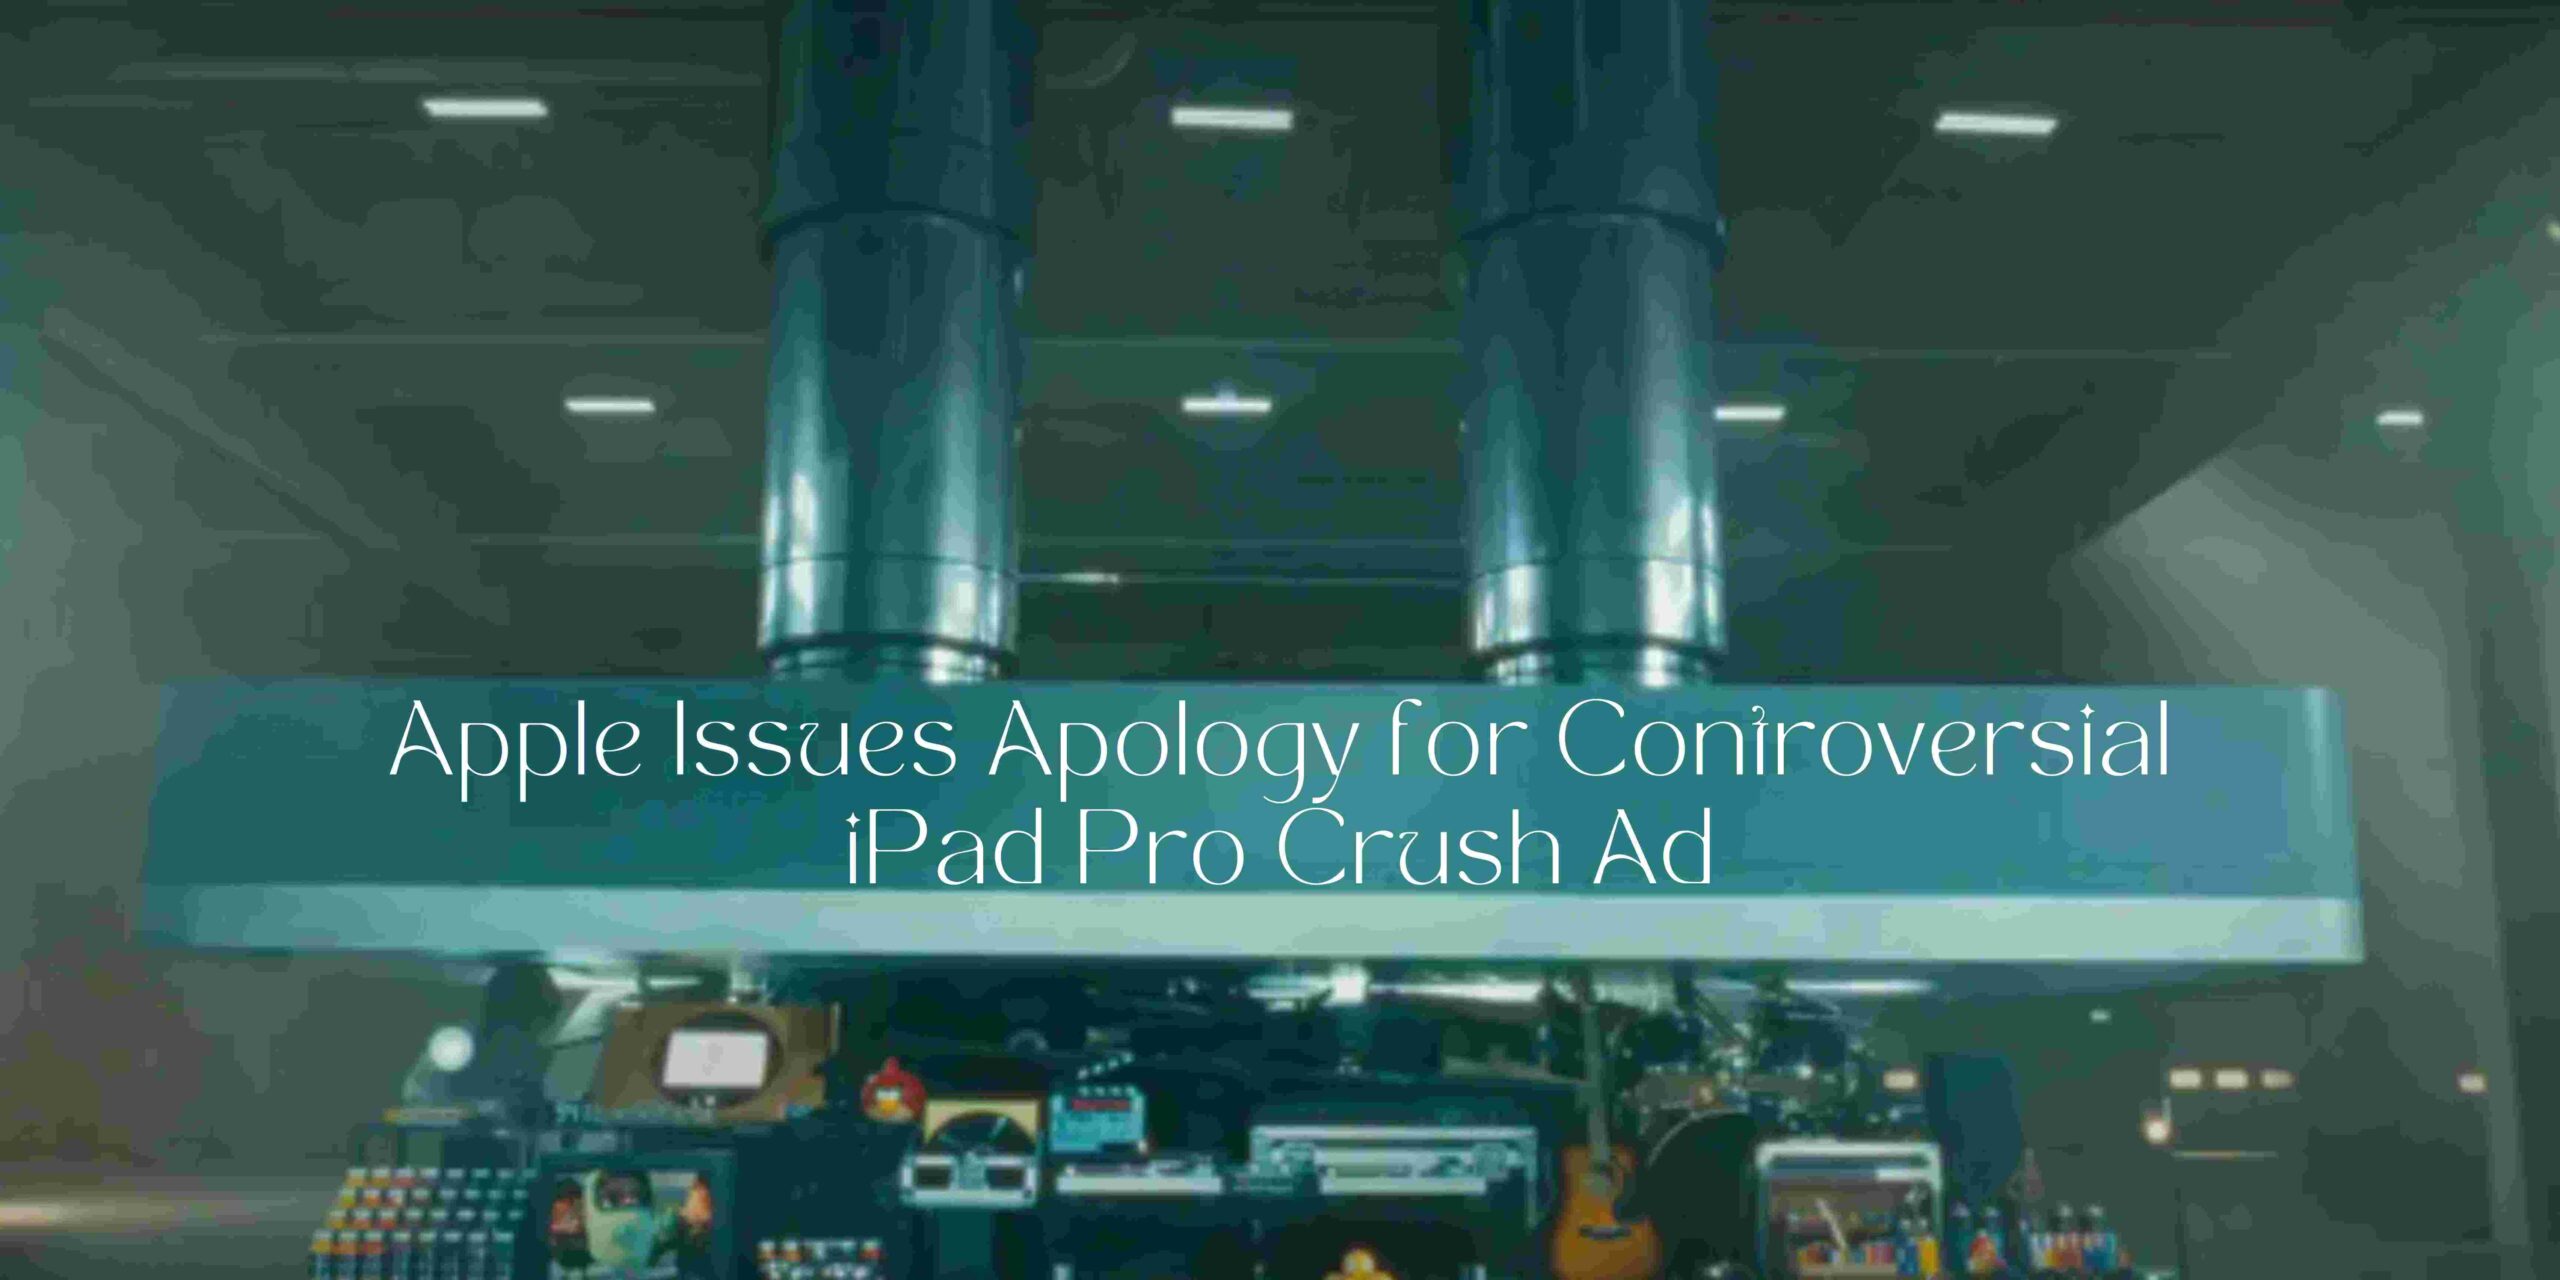 Apple Issues Apology for Controversial iPad Pro Crush Ad